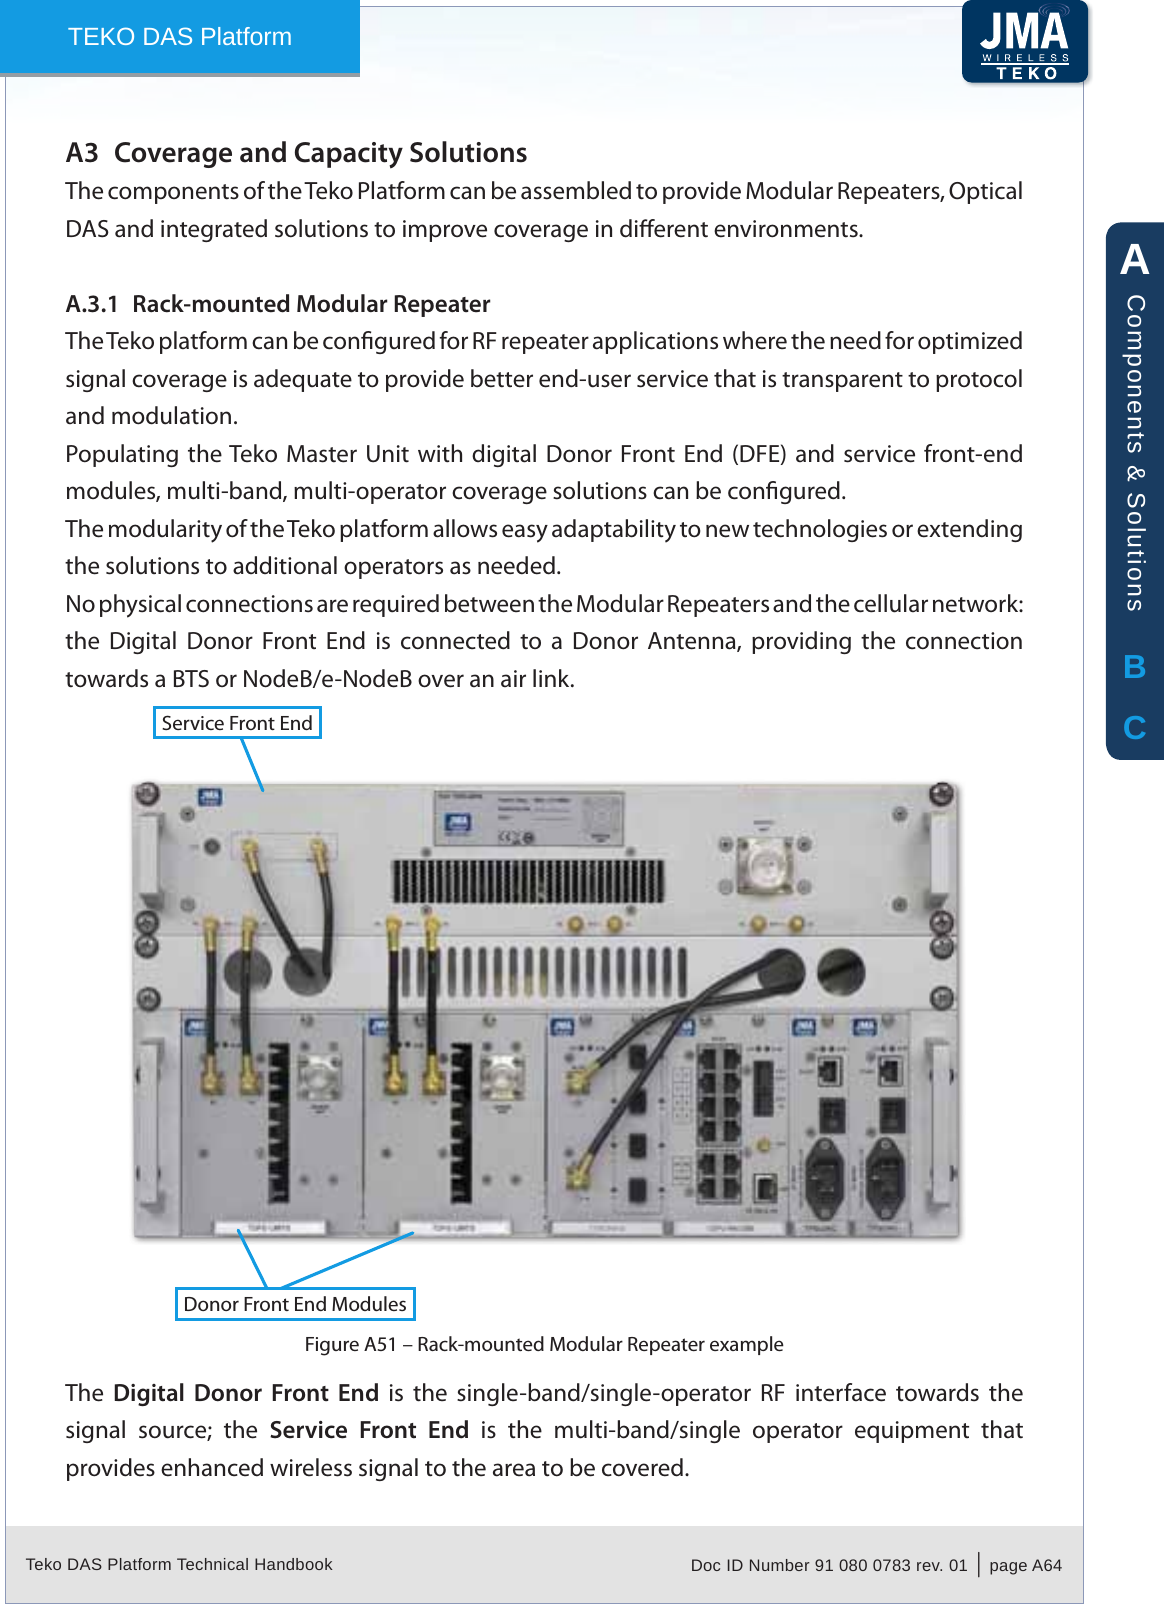 Teko DAS Platform Technical Handbook Doc ID Number 91 080 0783 rev. 01  |  page A64TEKO DAS PlatformCoverage and Capacity SolutionsA3 The components of the Teko Platform can be assembled to provide Modular Repeaters, Optical DAS and integrated solutions to improve coverage in dierent environments.Rack-mounted Modular RepeaterA.3.1 The Teko platform can be congured for RF repeater applications where the need for optimized signal coverage is adequate to provide better end-user service that is transparent to protocol and modulation.Populating the Teko Master  Unit with digital Donor  Front  End  (DFE) and service  front-end modules, multi-band, multi-operator coverage solutions can be congured.The modularity of the Teko platform allows easy adaptability to new technologies or extending the solutions to additional operators as needed.No physical connections are required between the Modular Repeaters and the cellular network: the  Digital  Donor  Front  End  is  connected  to  a  Donor  Antenna,  providing  the  connection towards a BTS or NodeB/e-NodeB over an air link.Donor Front End ModulesService Front EndRack-mounted Modular Repeater exampleFigure A51 – The  Digital  Donor  Front  End  is  the  single-band/single-operator  RF  interface  towards  the signal  source;  the  Service  Front  End  is  the  multi-band/single  operator  equipment  that provides enhanced wireless signal to the area to be covered.ABCComponents &amp; Solutions